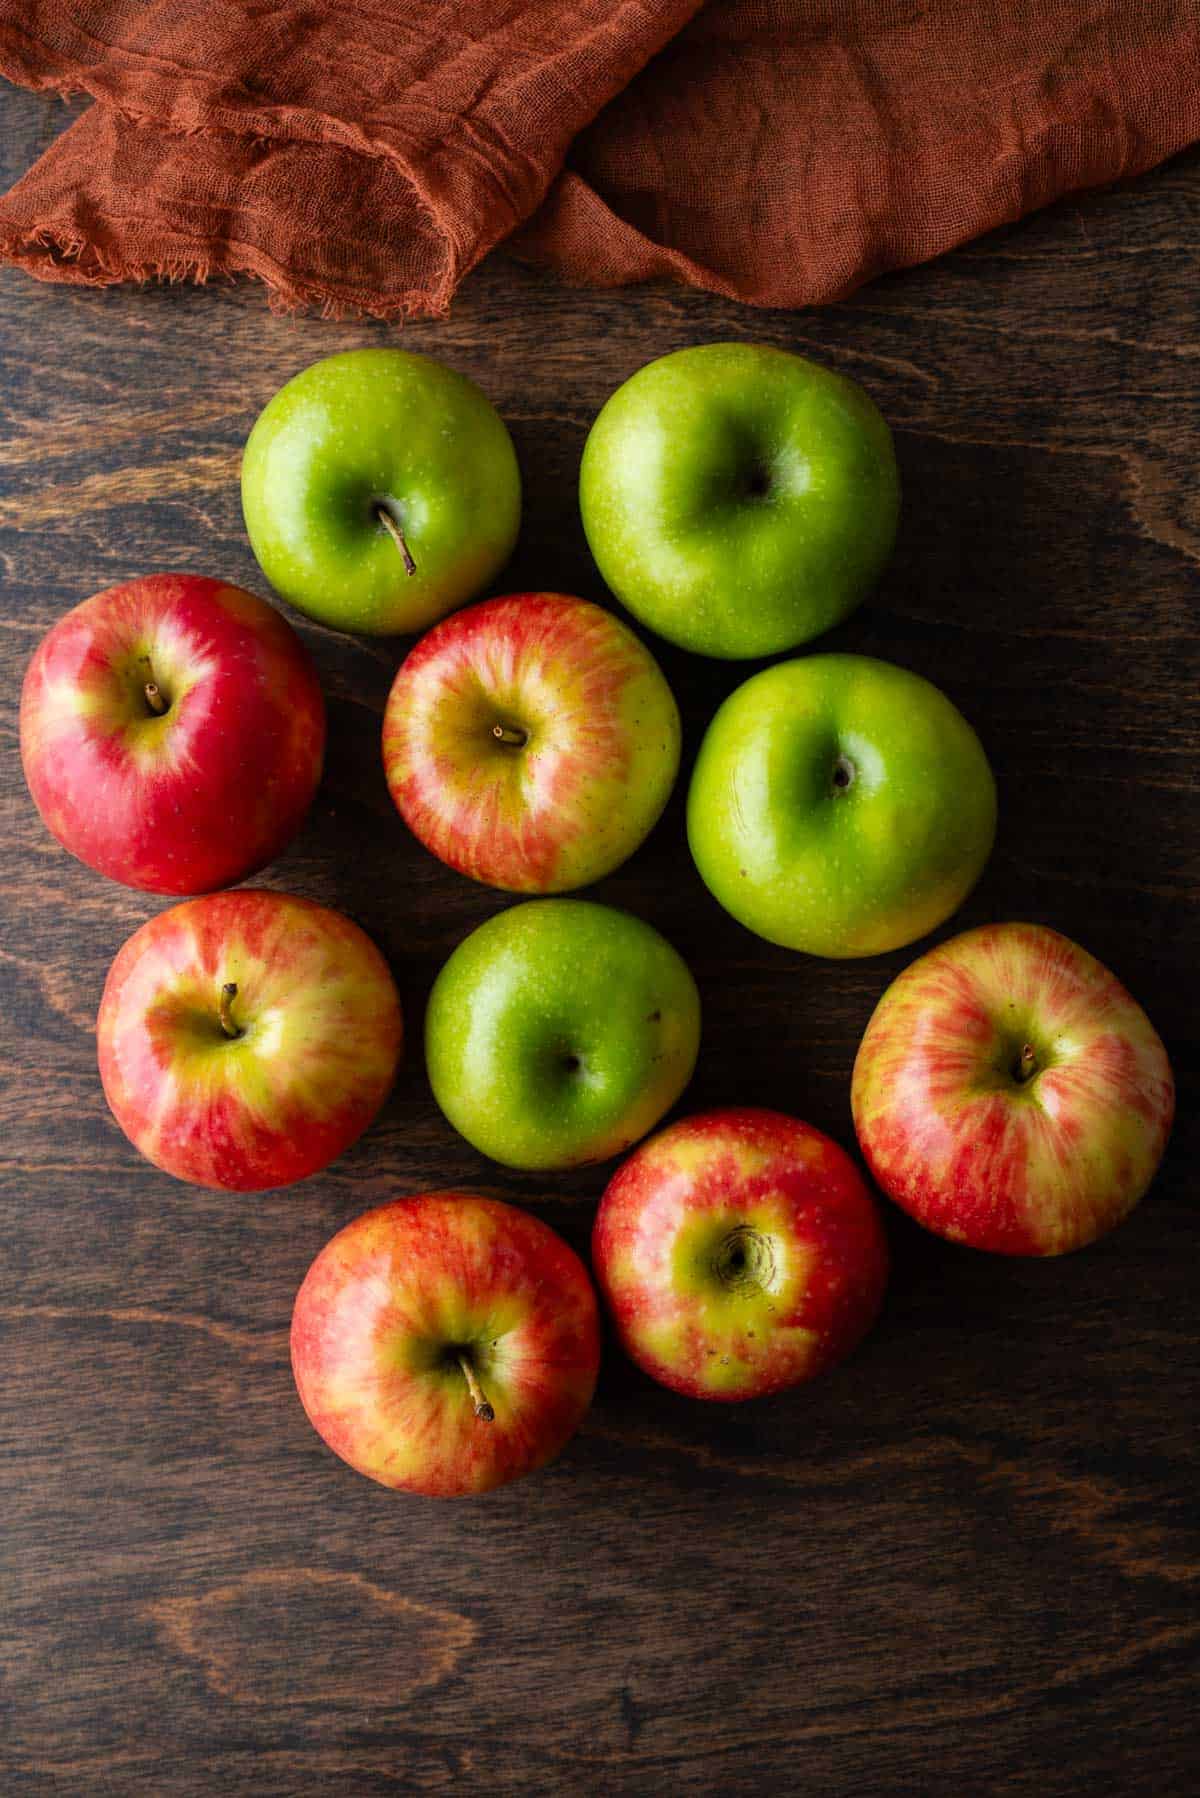 an assortment of different types of apples on a wood surface